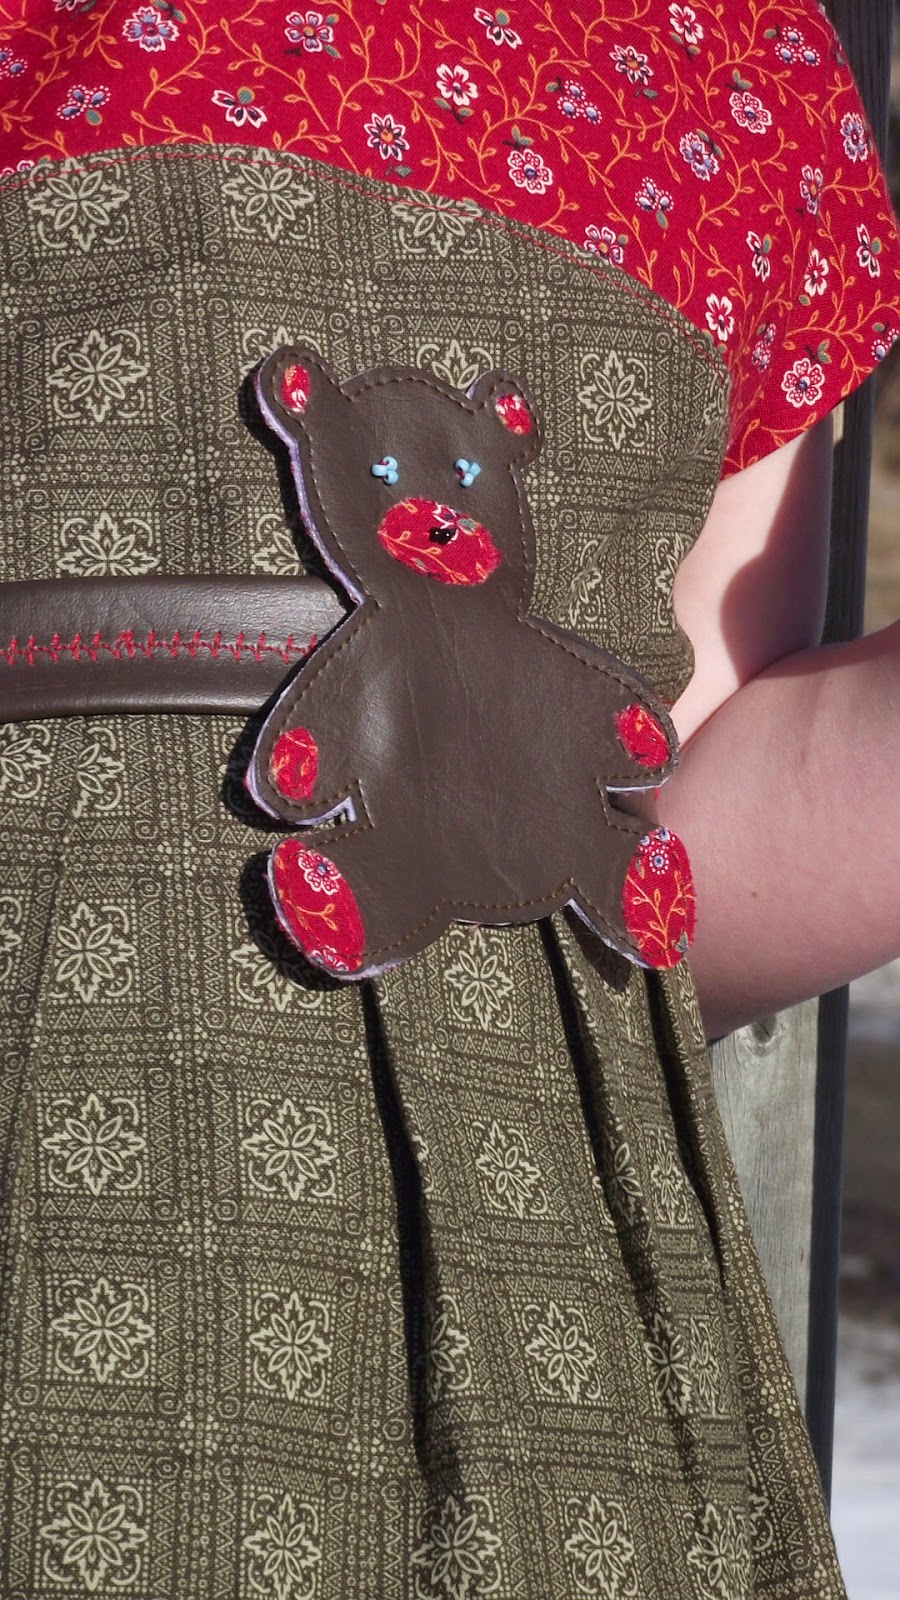 http://fabuloushomesewn.blogspot.ca/2014/04/faux-leather-belt-tutorial-and-free.html